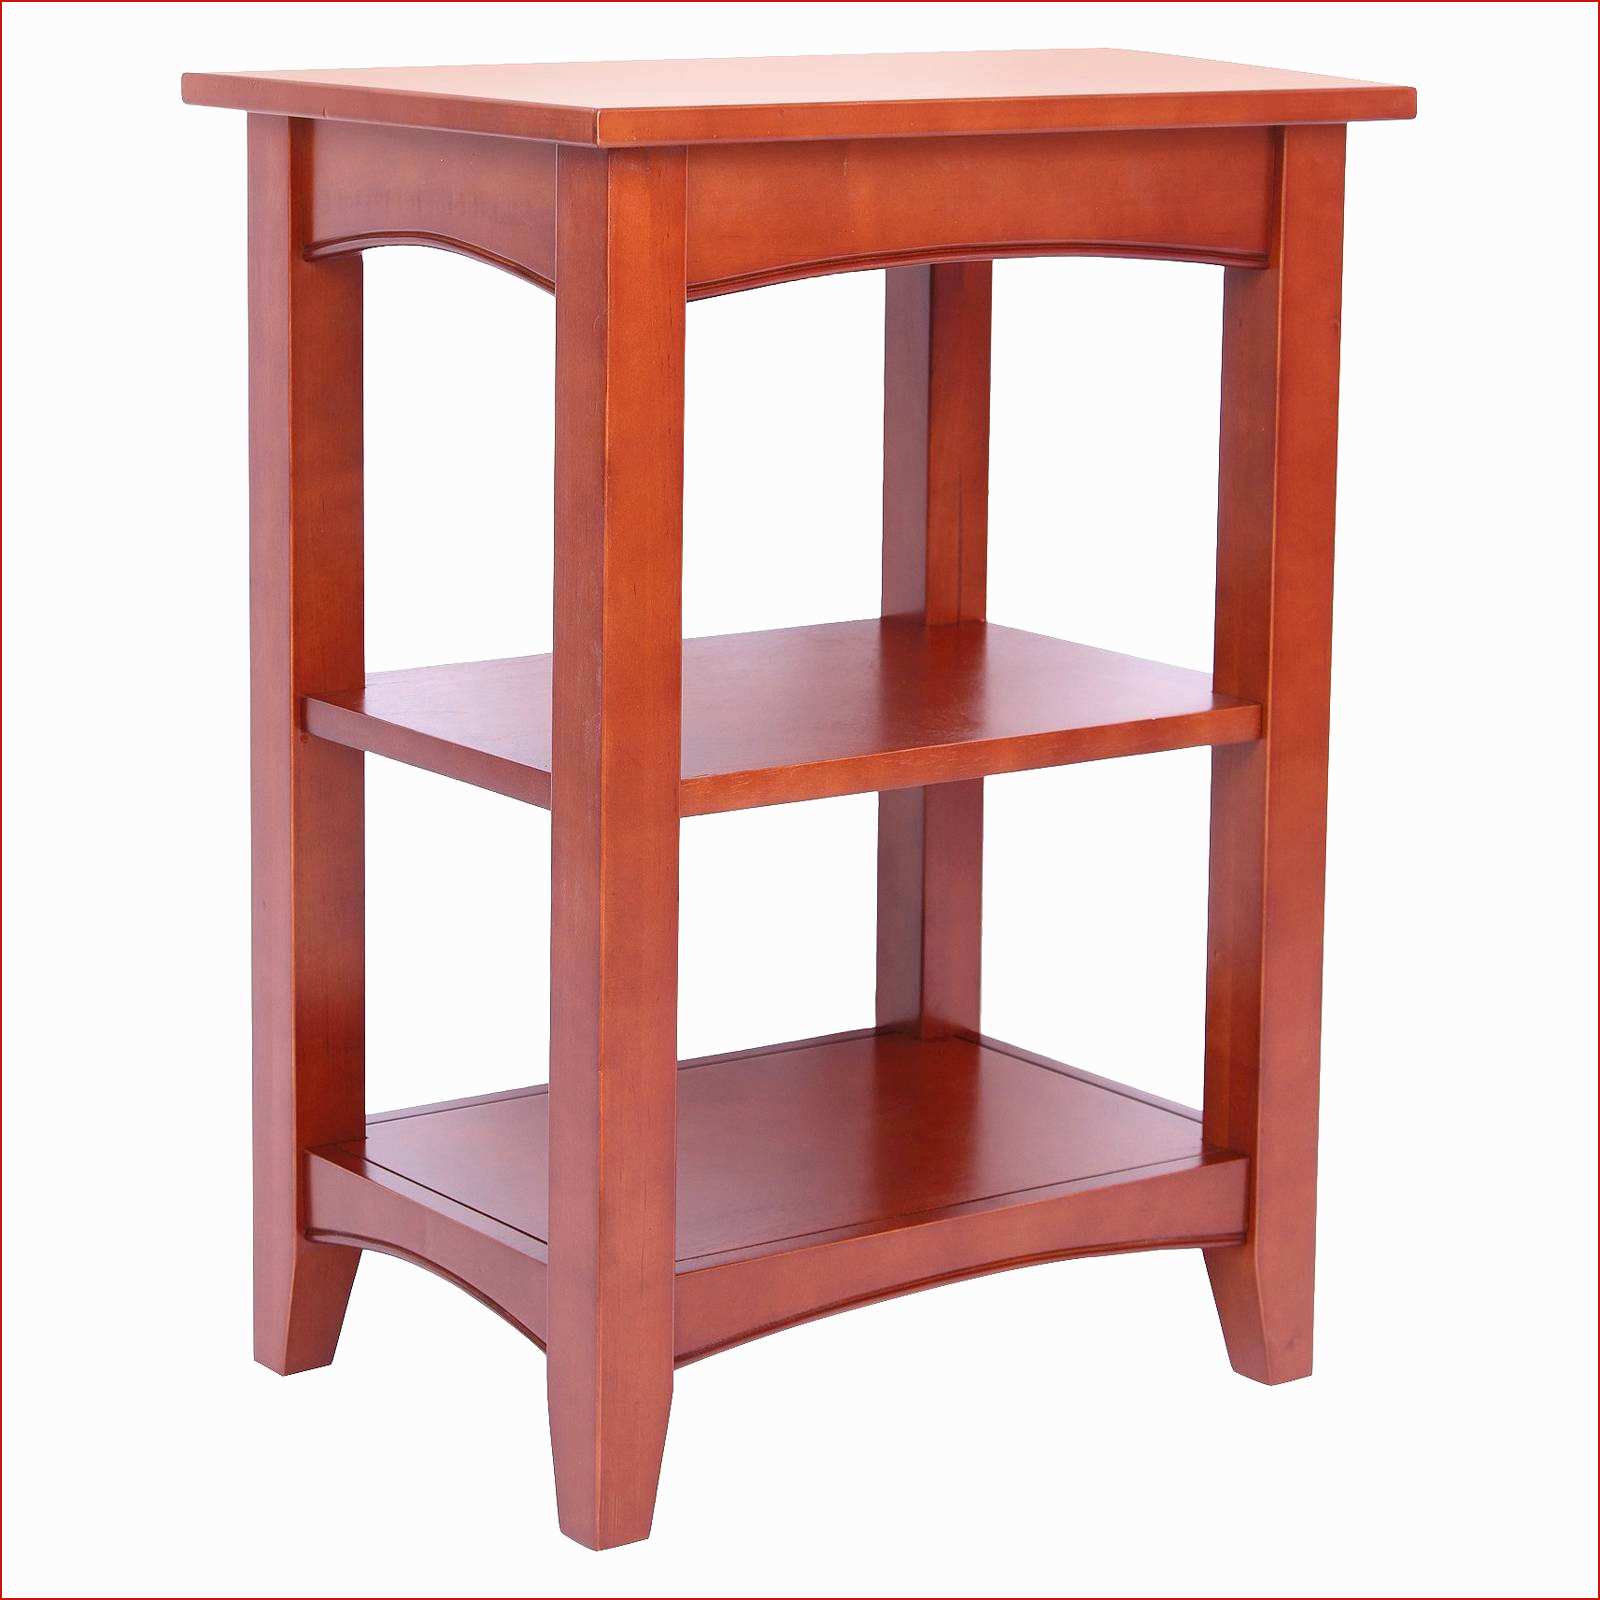 end tables with shelves cute zspmed corner accent awesome cottage shelf side table alaterre drawer pottery barn circle aztec furniture outdoor and bench couch covers kmart kohls